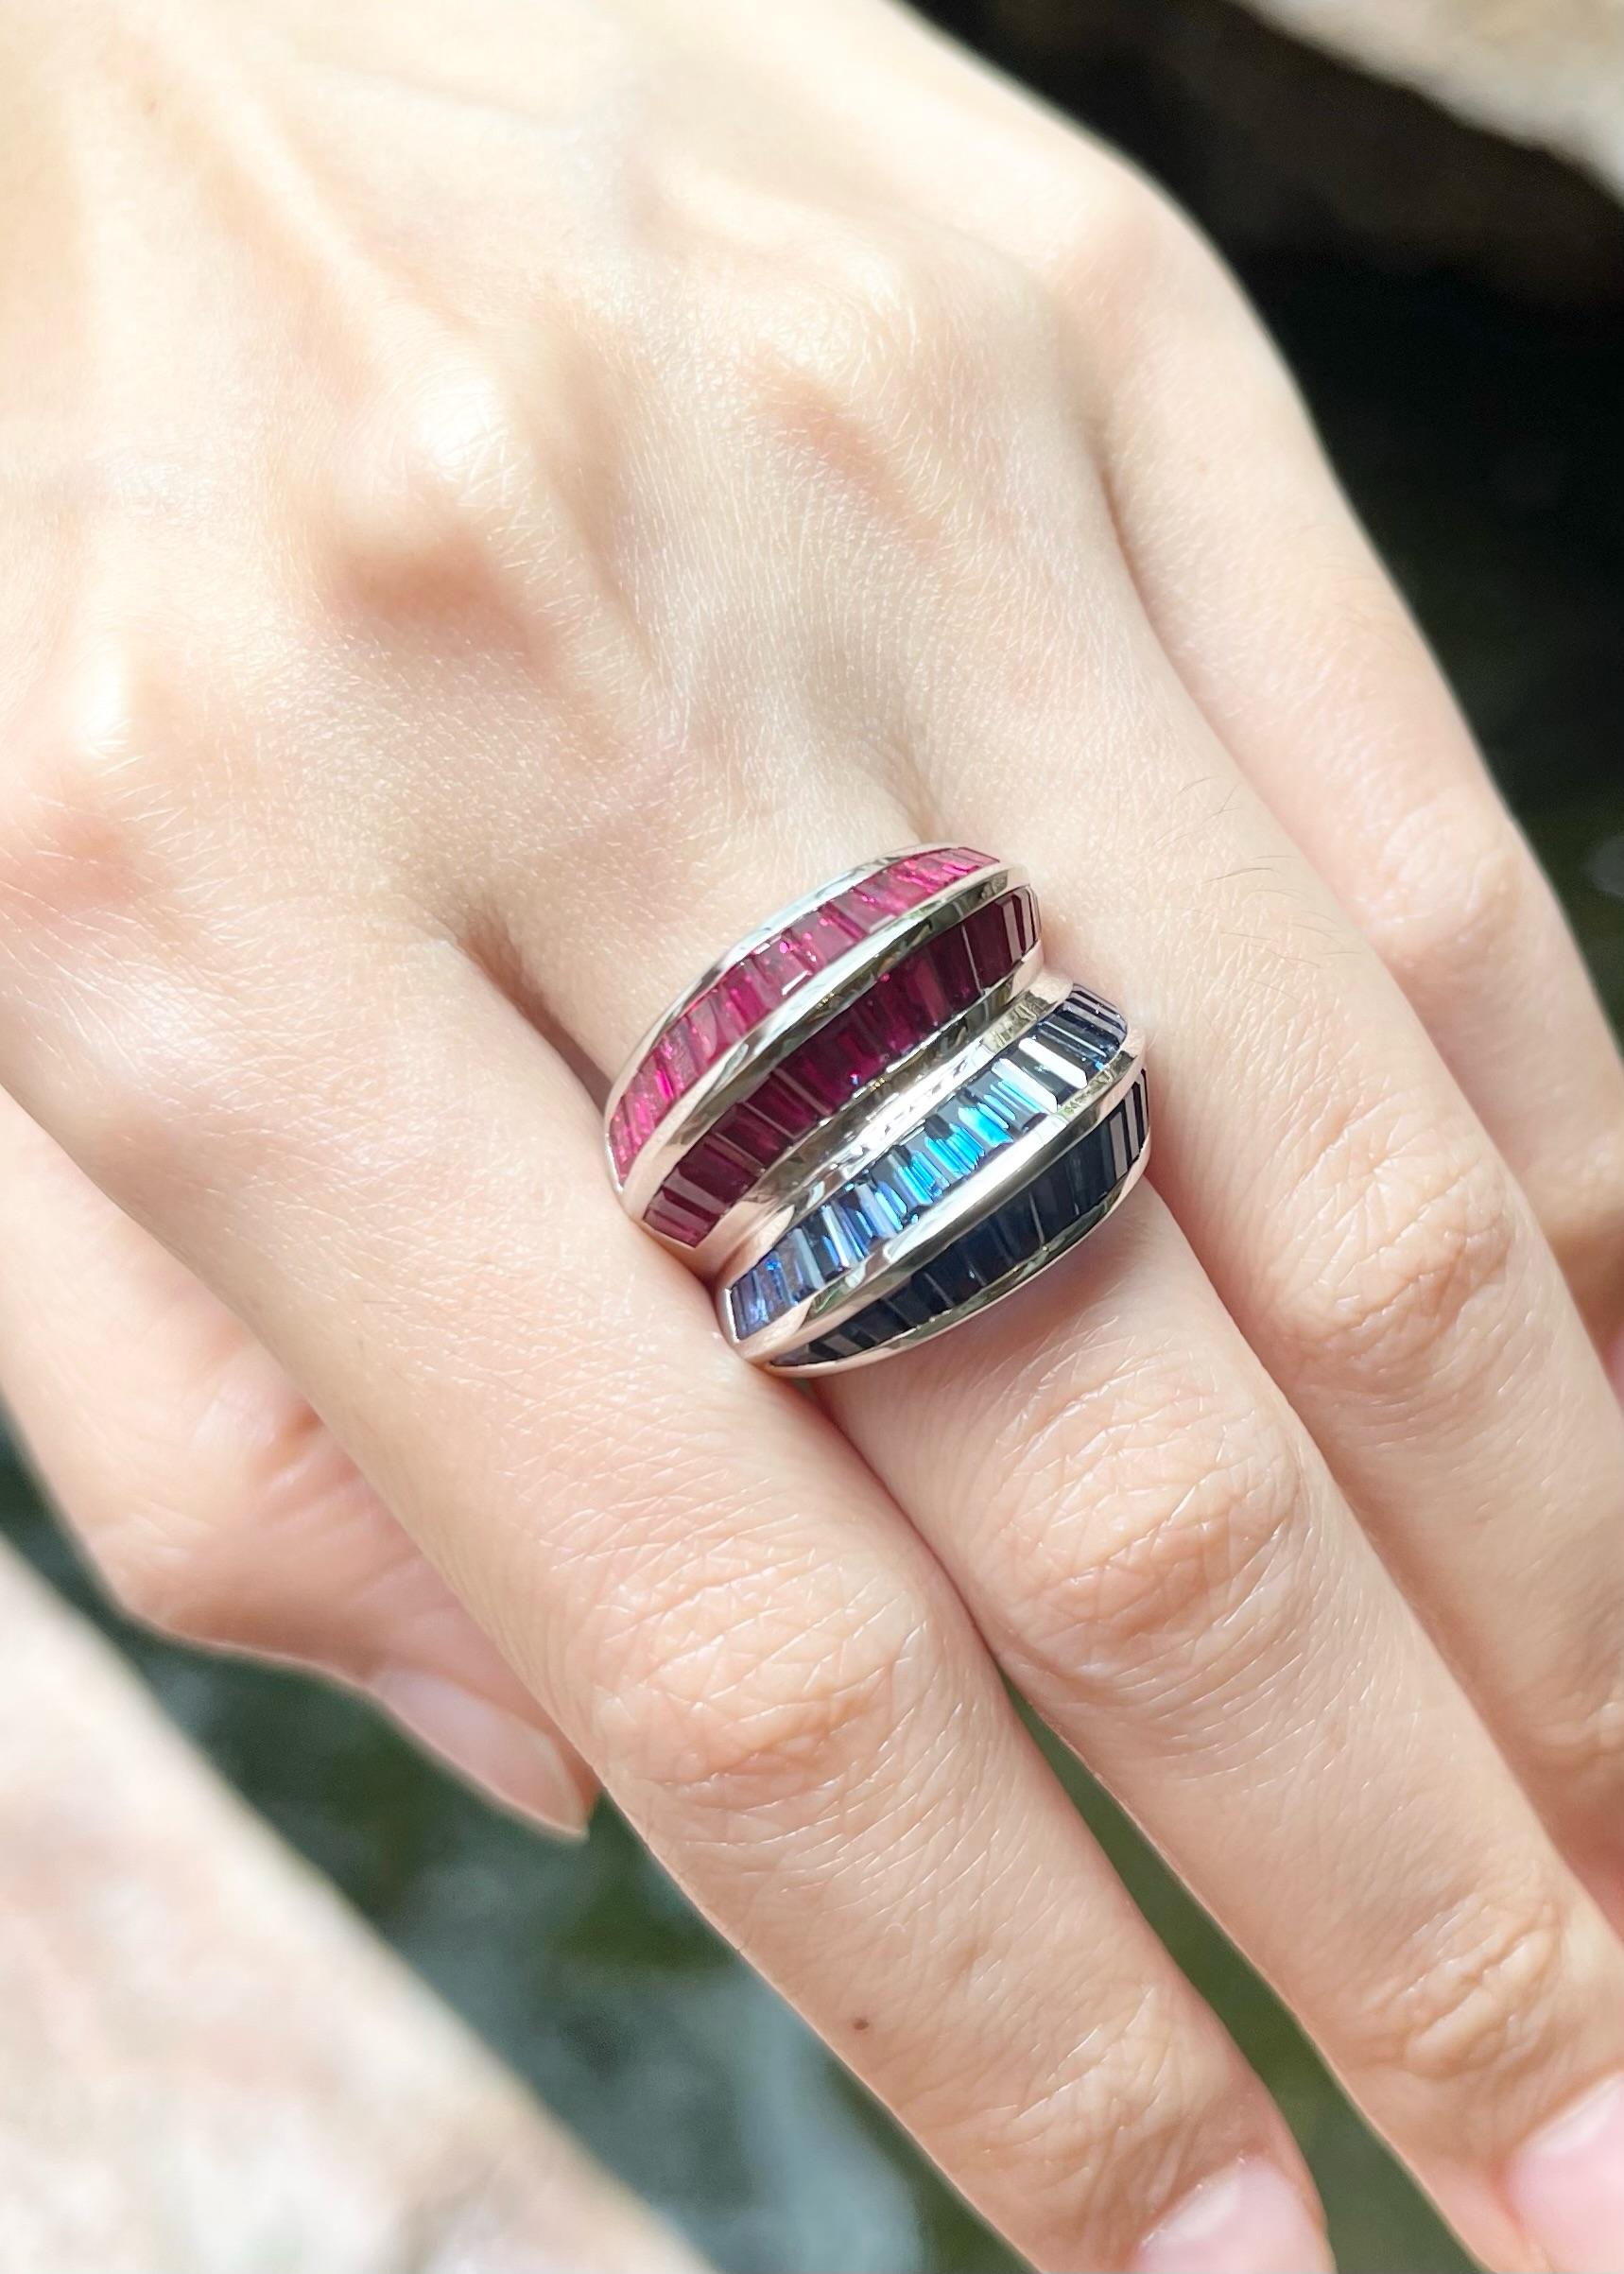 Blue Sapphire 4.80 carats and Ruby 4.15 carats Ring set in 18K White Gold Settings

Width:  2.3 cm 
Length: 1.9 cm
Ring Size: 55
Total Weight: 13.11 grams

